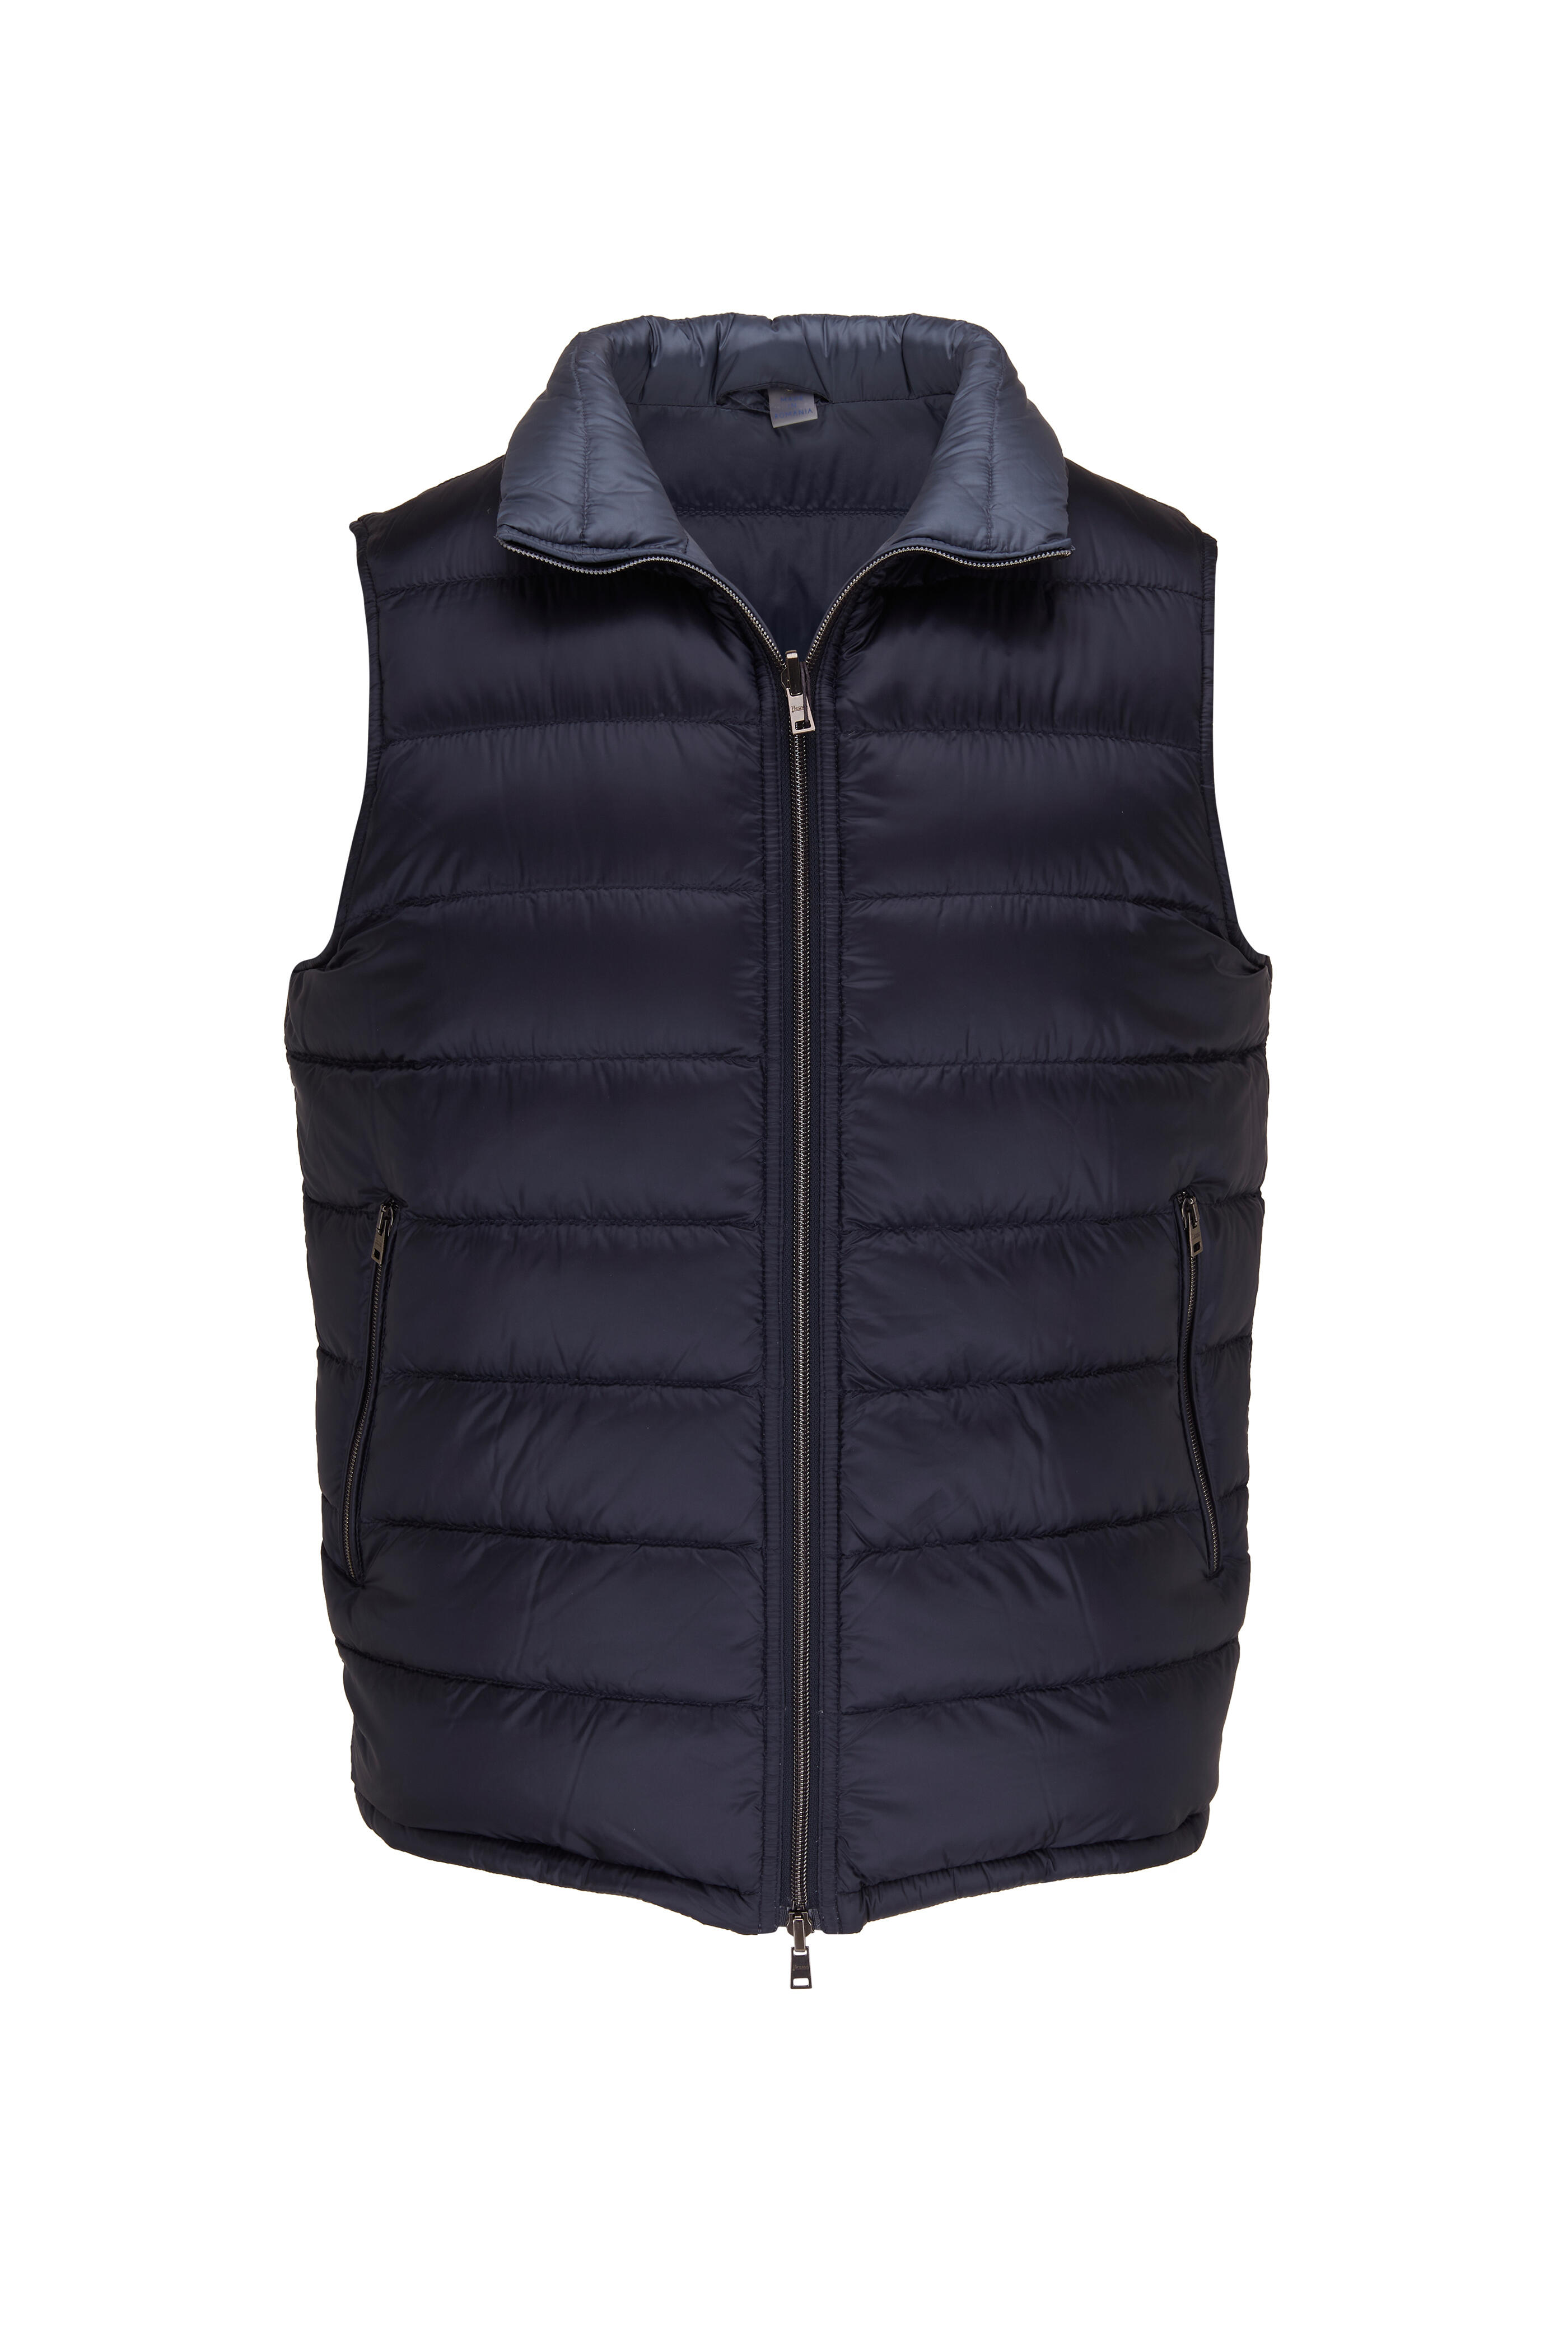 Herno - Navy & Blue Reversible Down Vest | Mitchell Stores